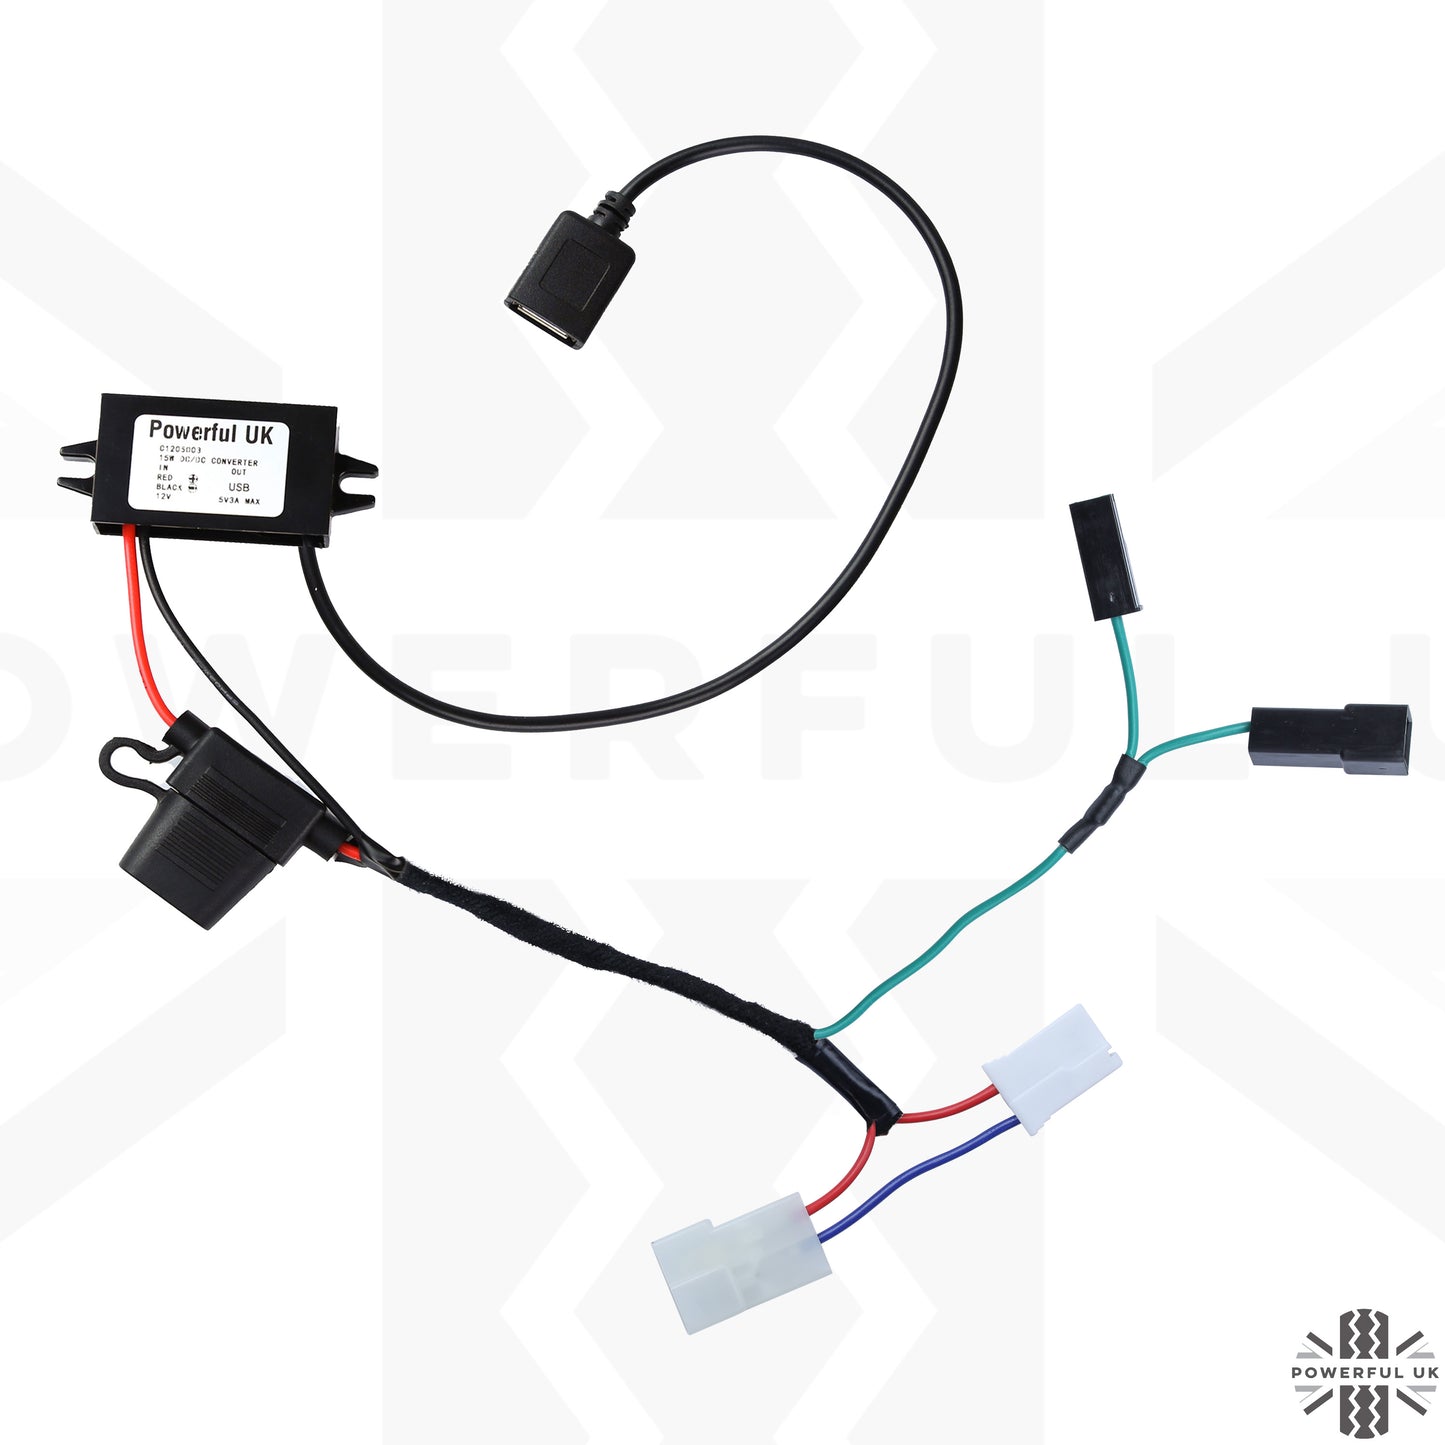 Overhead Console 'Dashcam' Wiring Kit - Tap-in Loom + USB-A Adapter for Land Rover Freelander 2 (2012+)